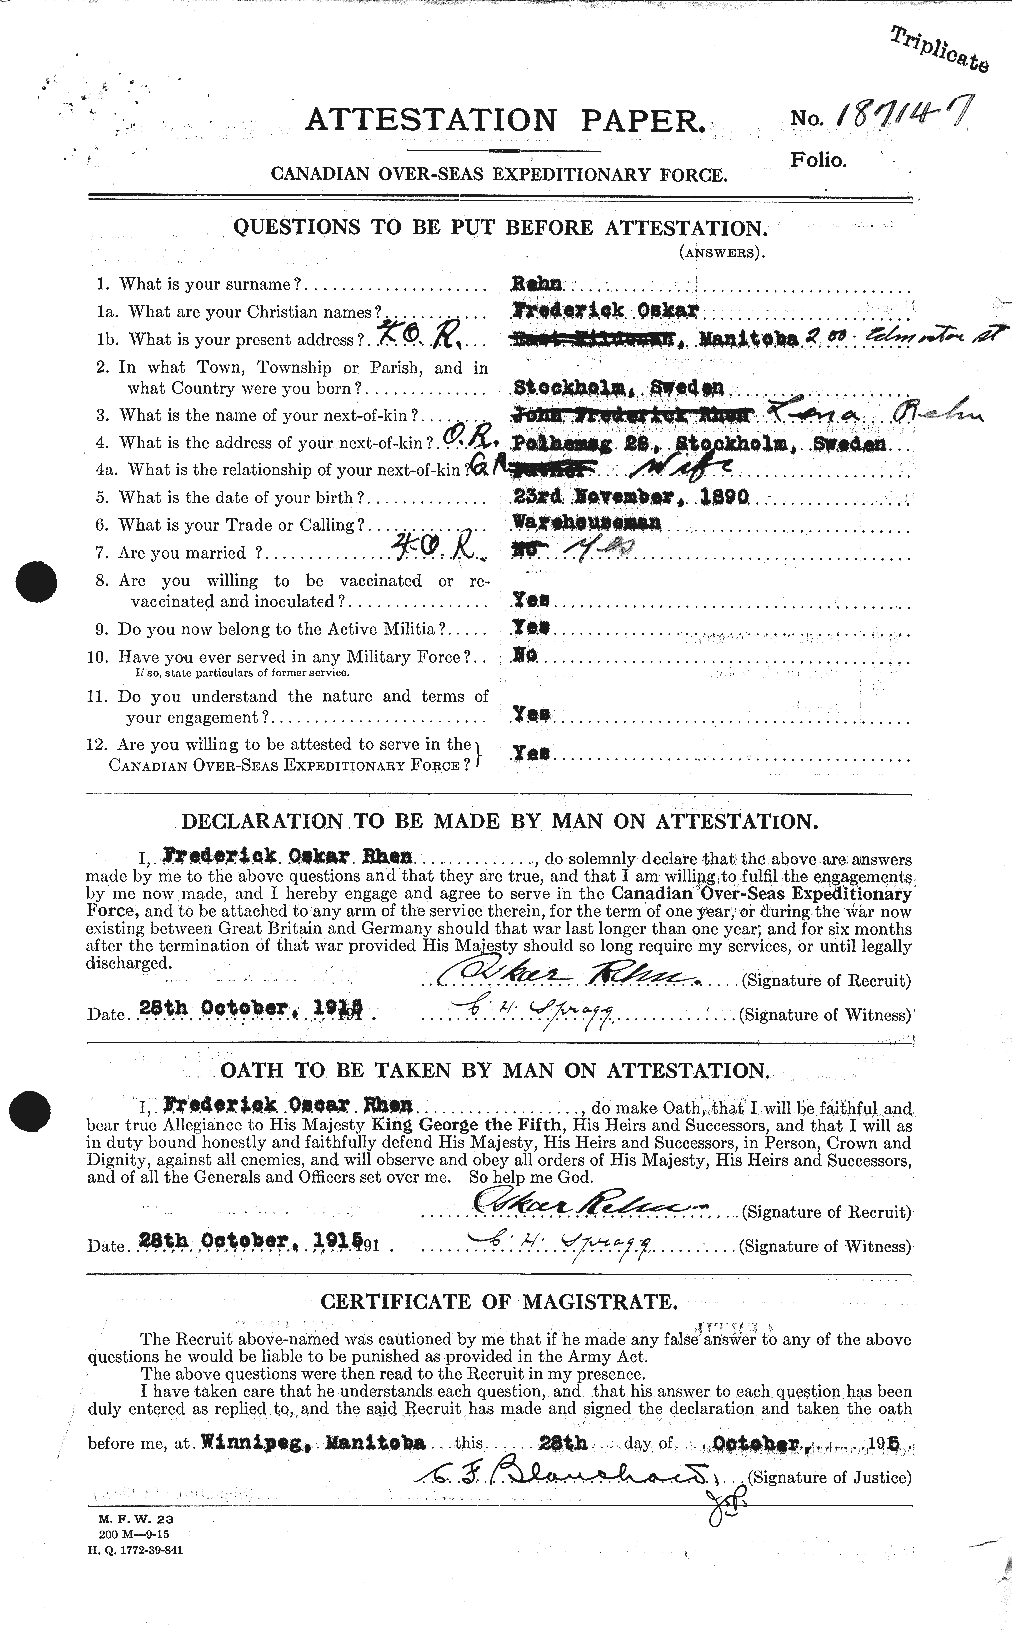 Personnel Records of the First World War - CEF 597698a